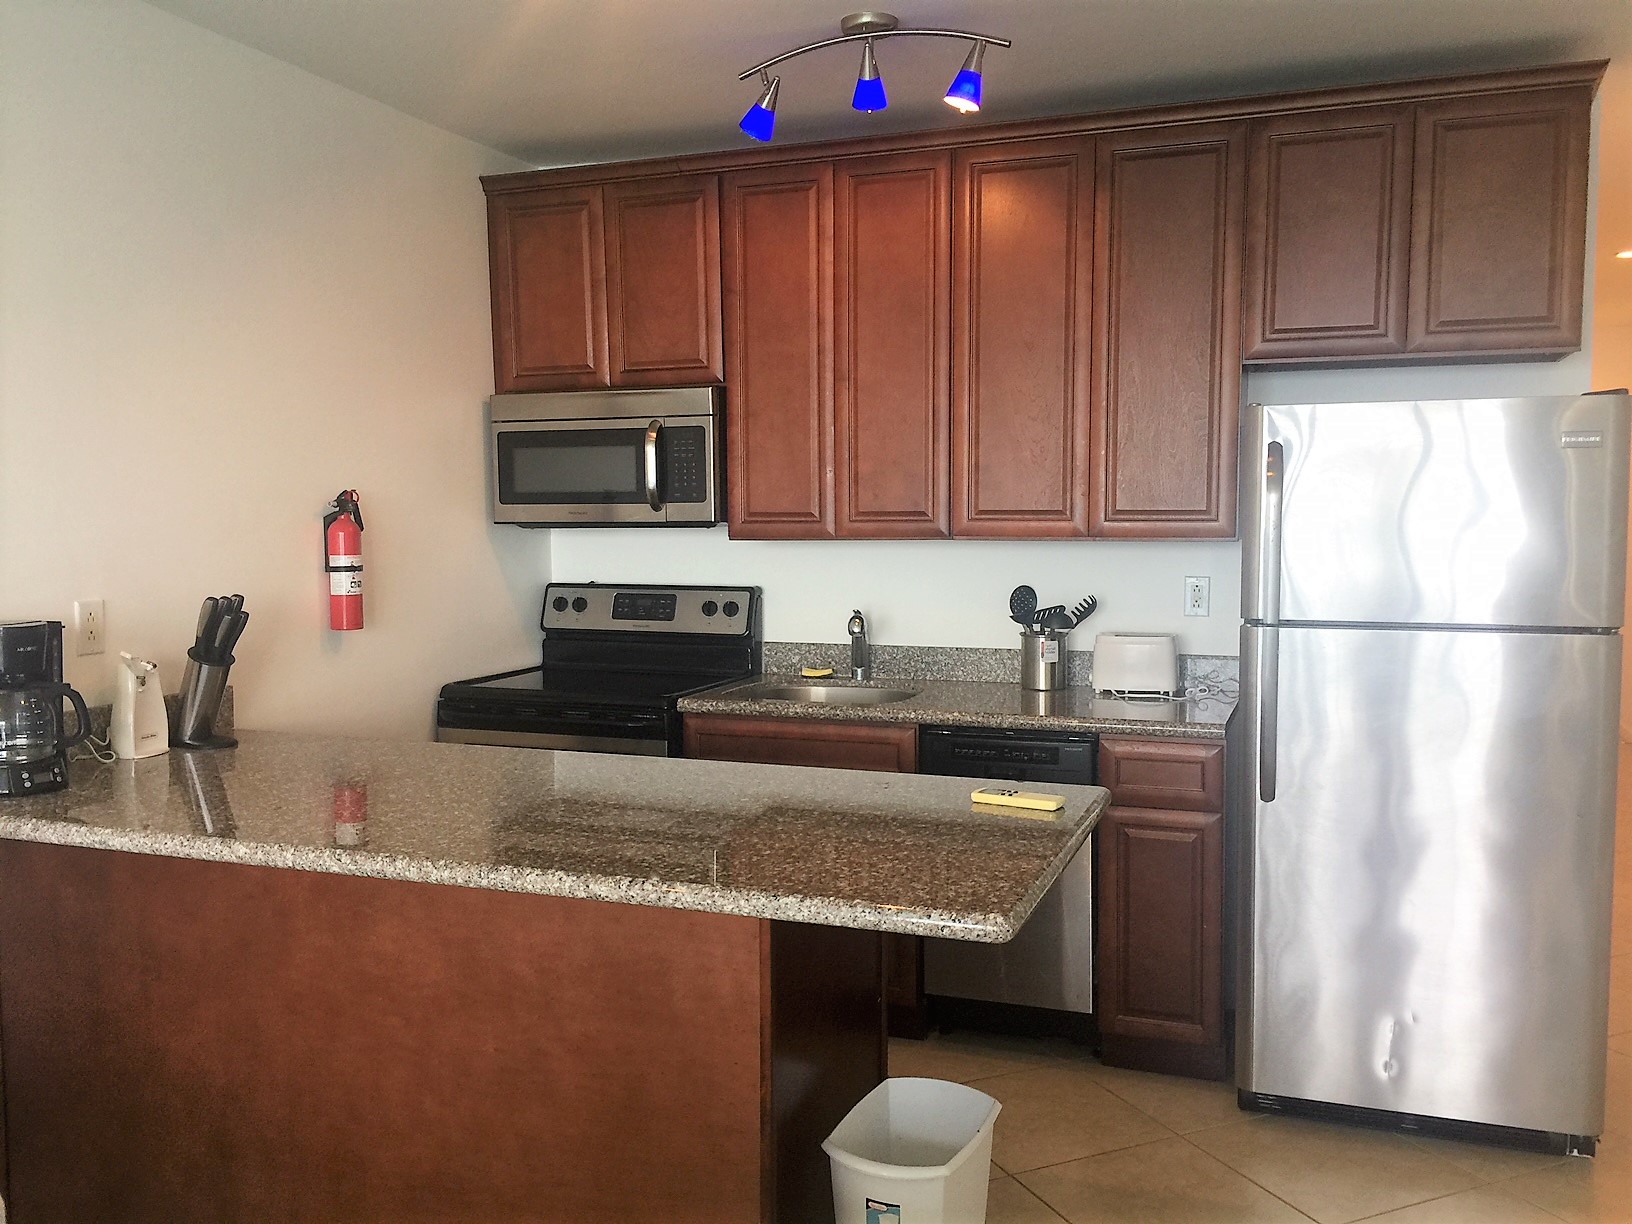  Kitchen in Vista Villas large 1 bedroom cliff top condos For Rent in St. Kitts